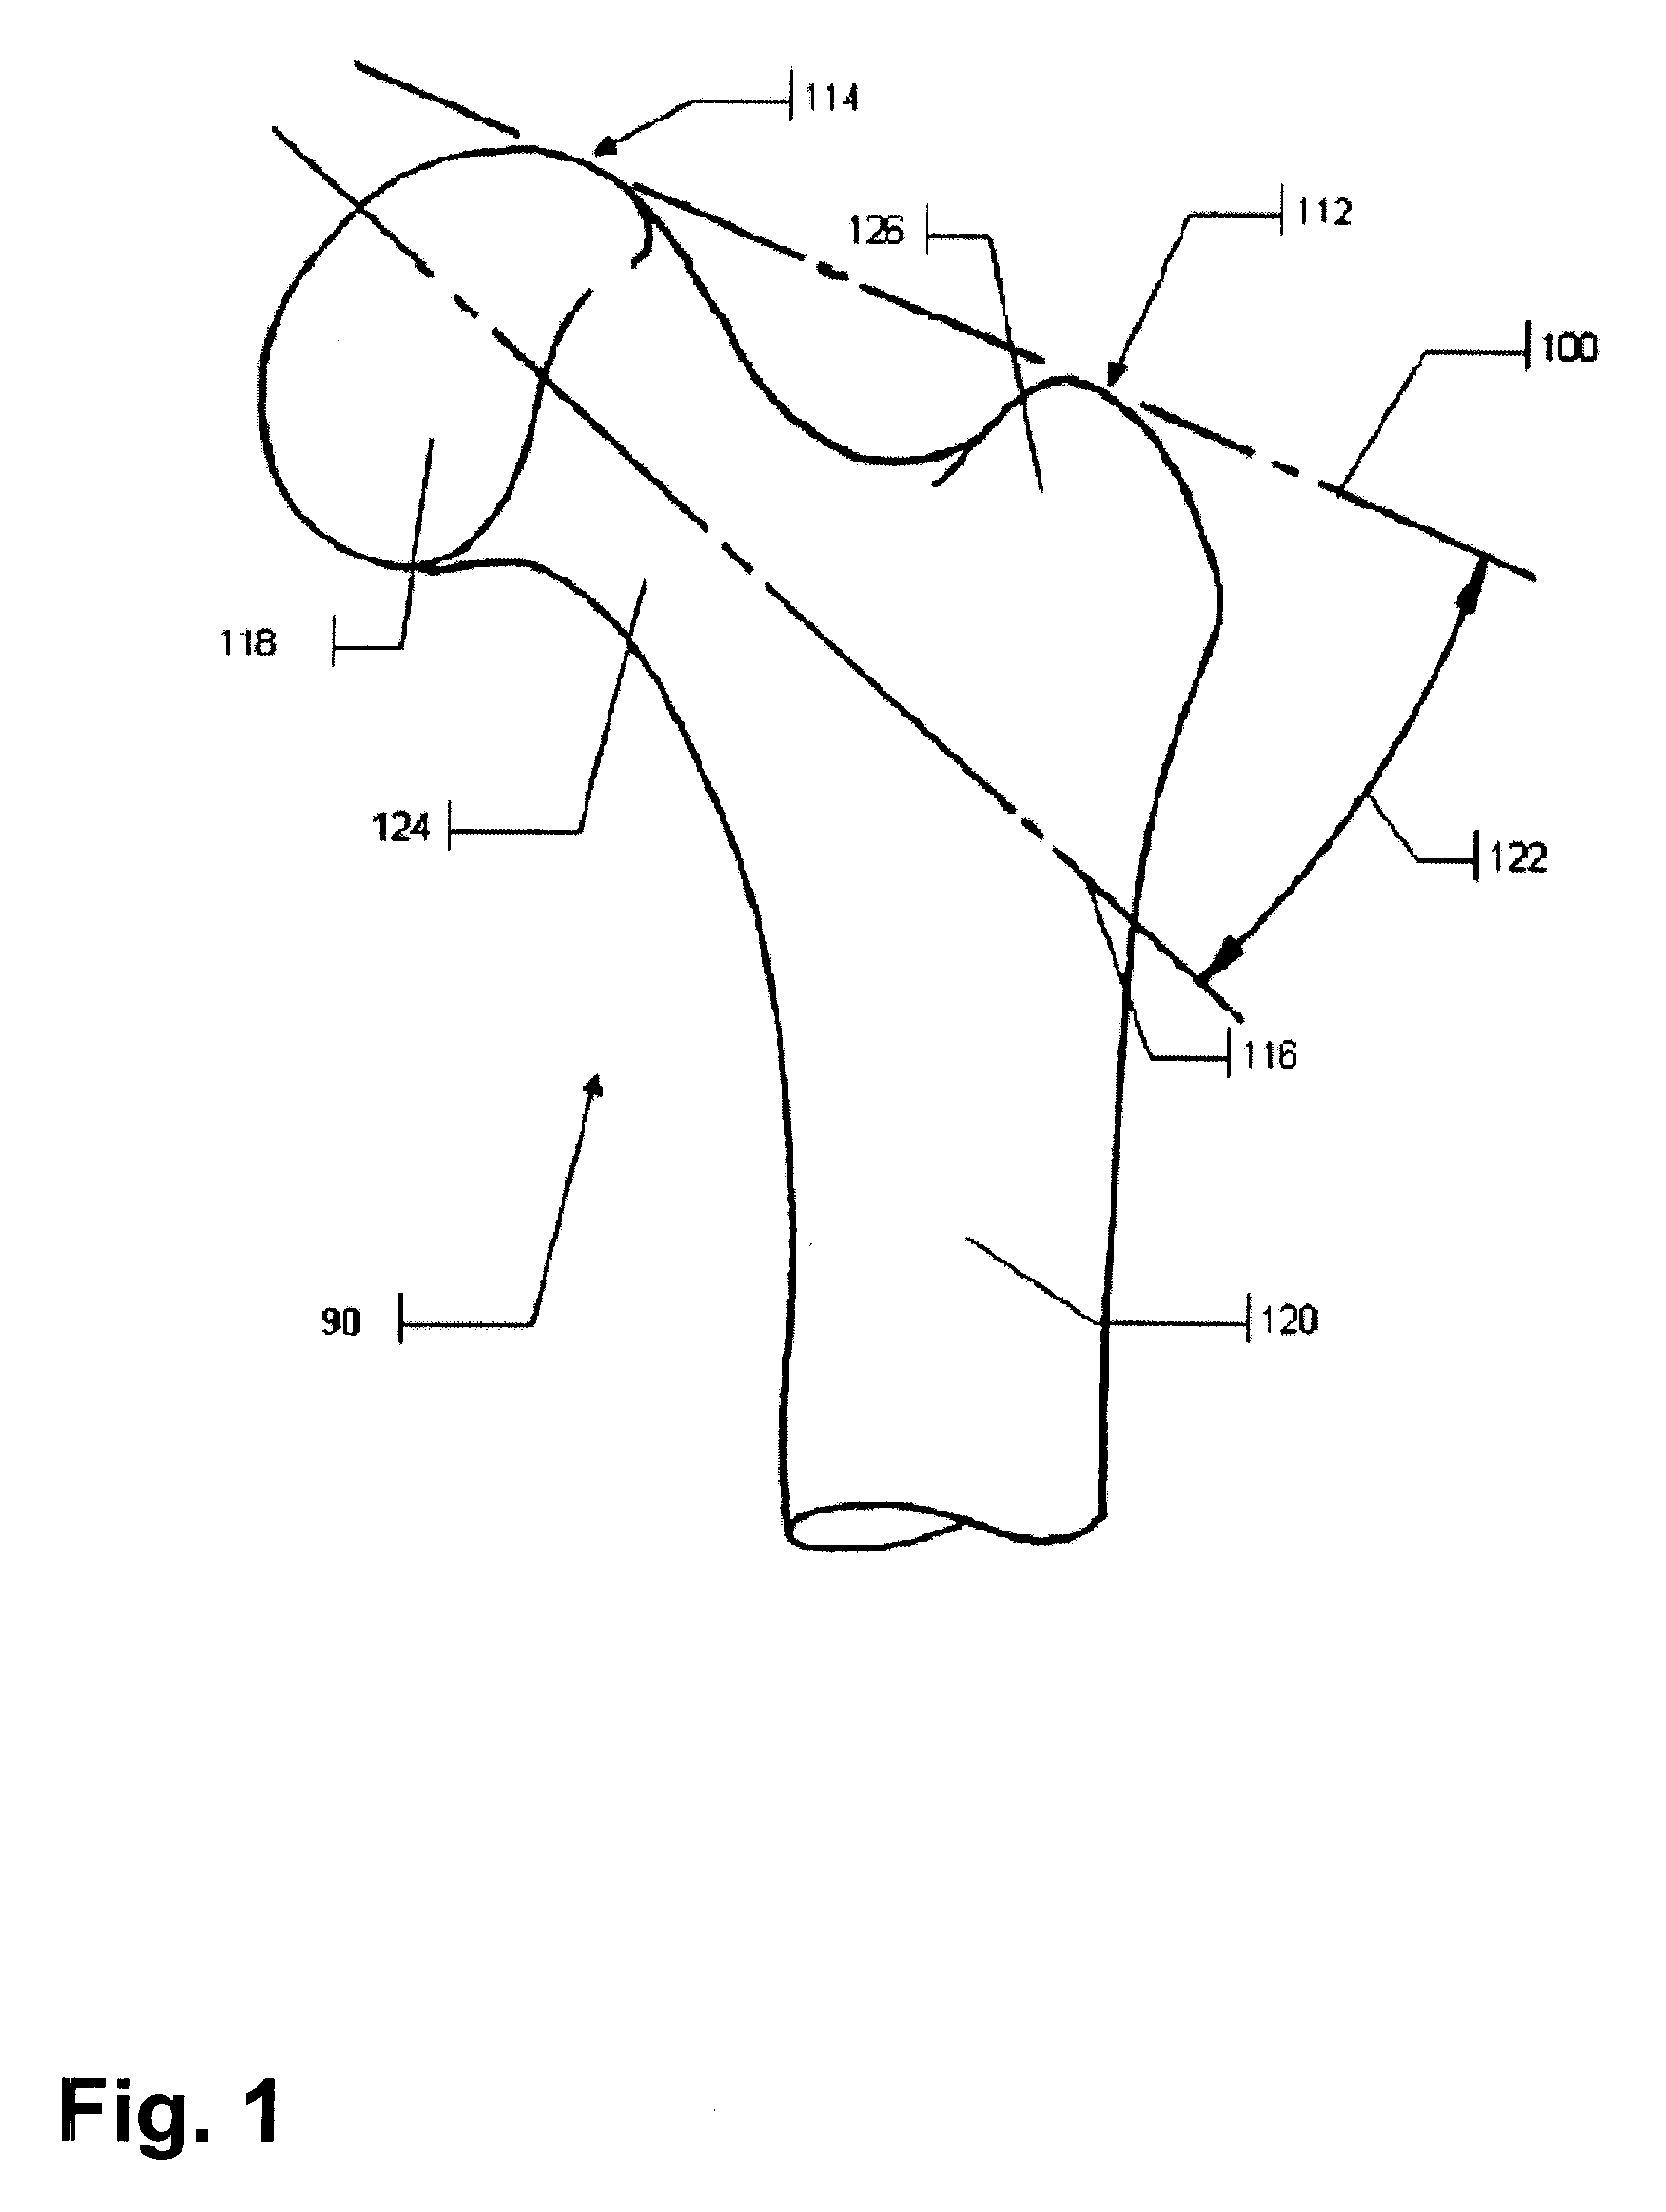 Method and Apparatus for Computer-Assisted Femoral Head Resurfacing